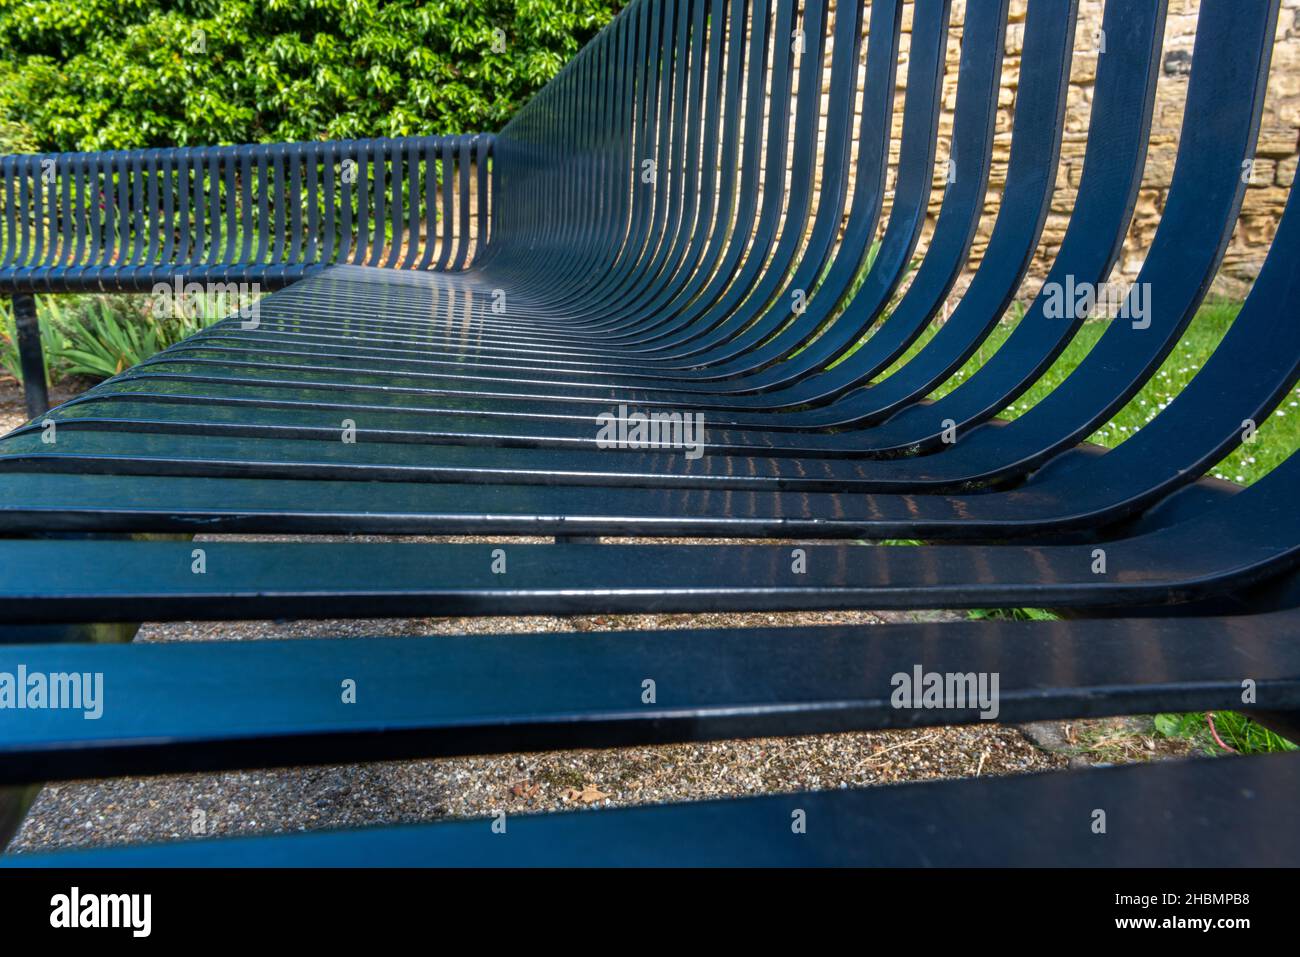 Close up view of a black painted metal slatted outdoor bench seat Stock Photo